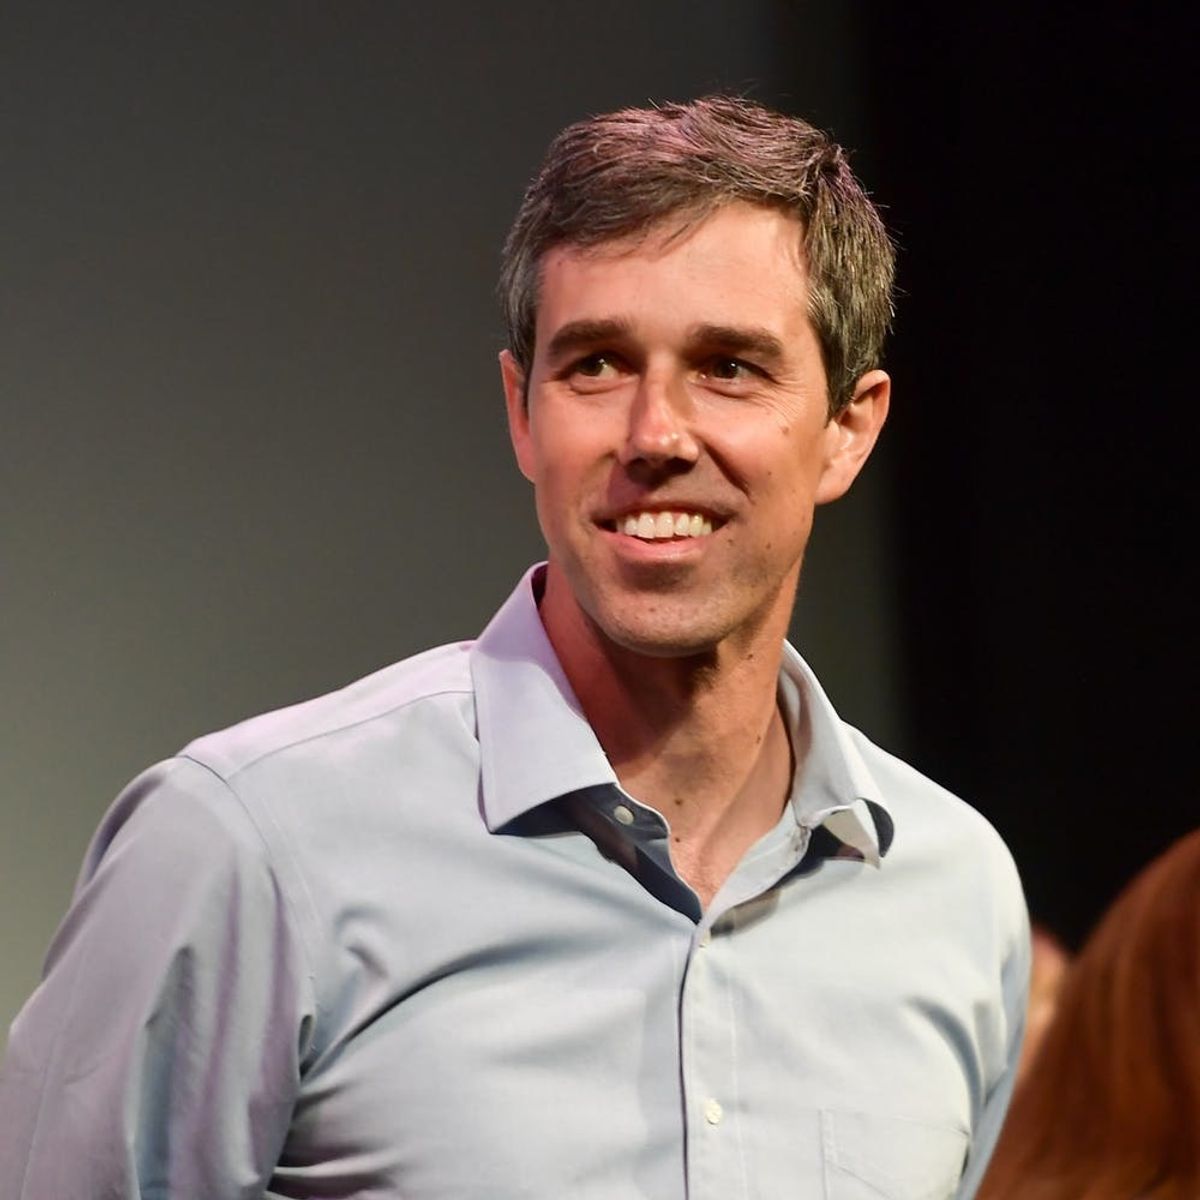 How Beto O’Rourke Went from 2018 Midterms Superstar to Controversial 2020 Presidential Candidate